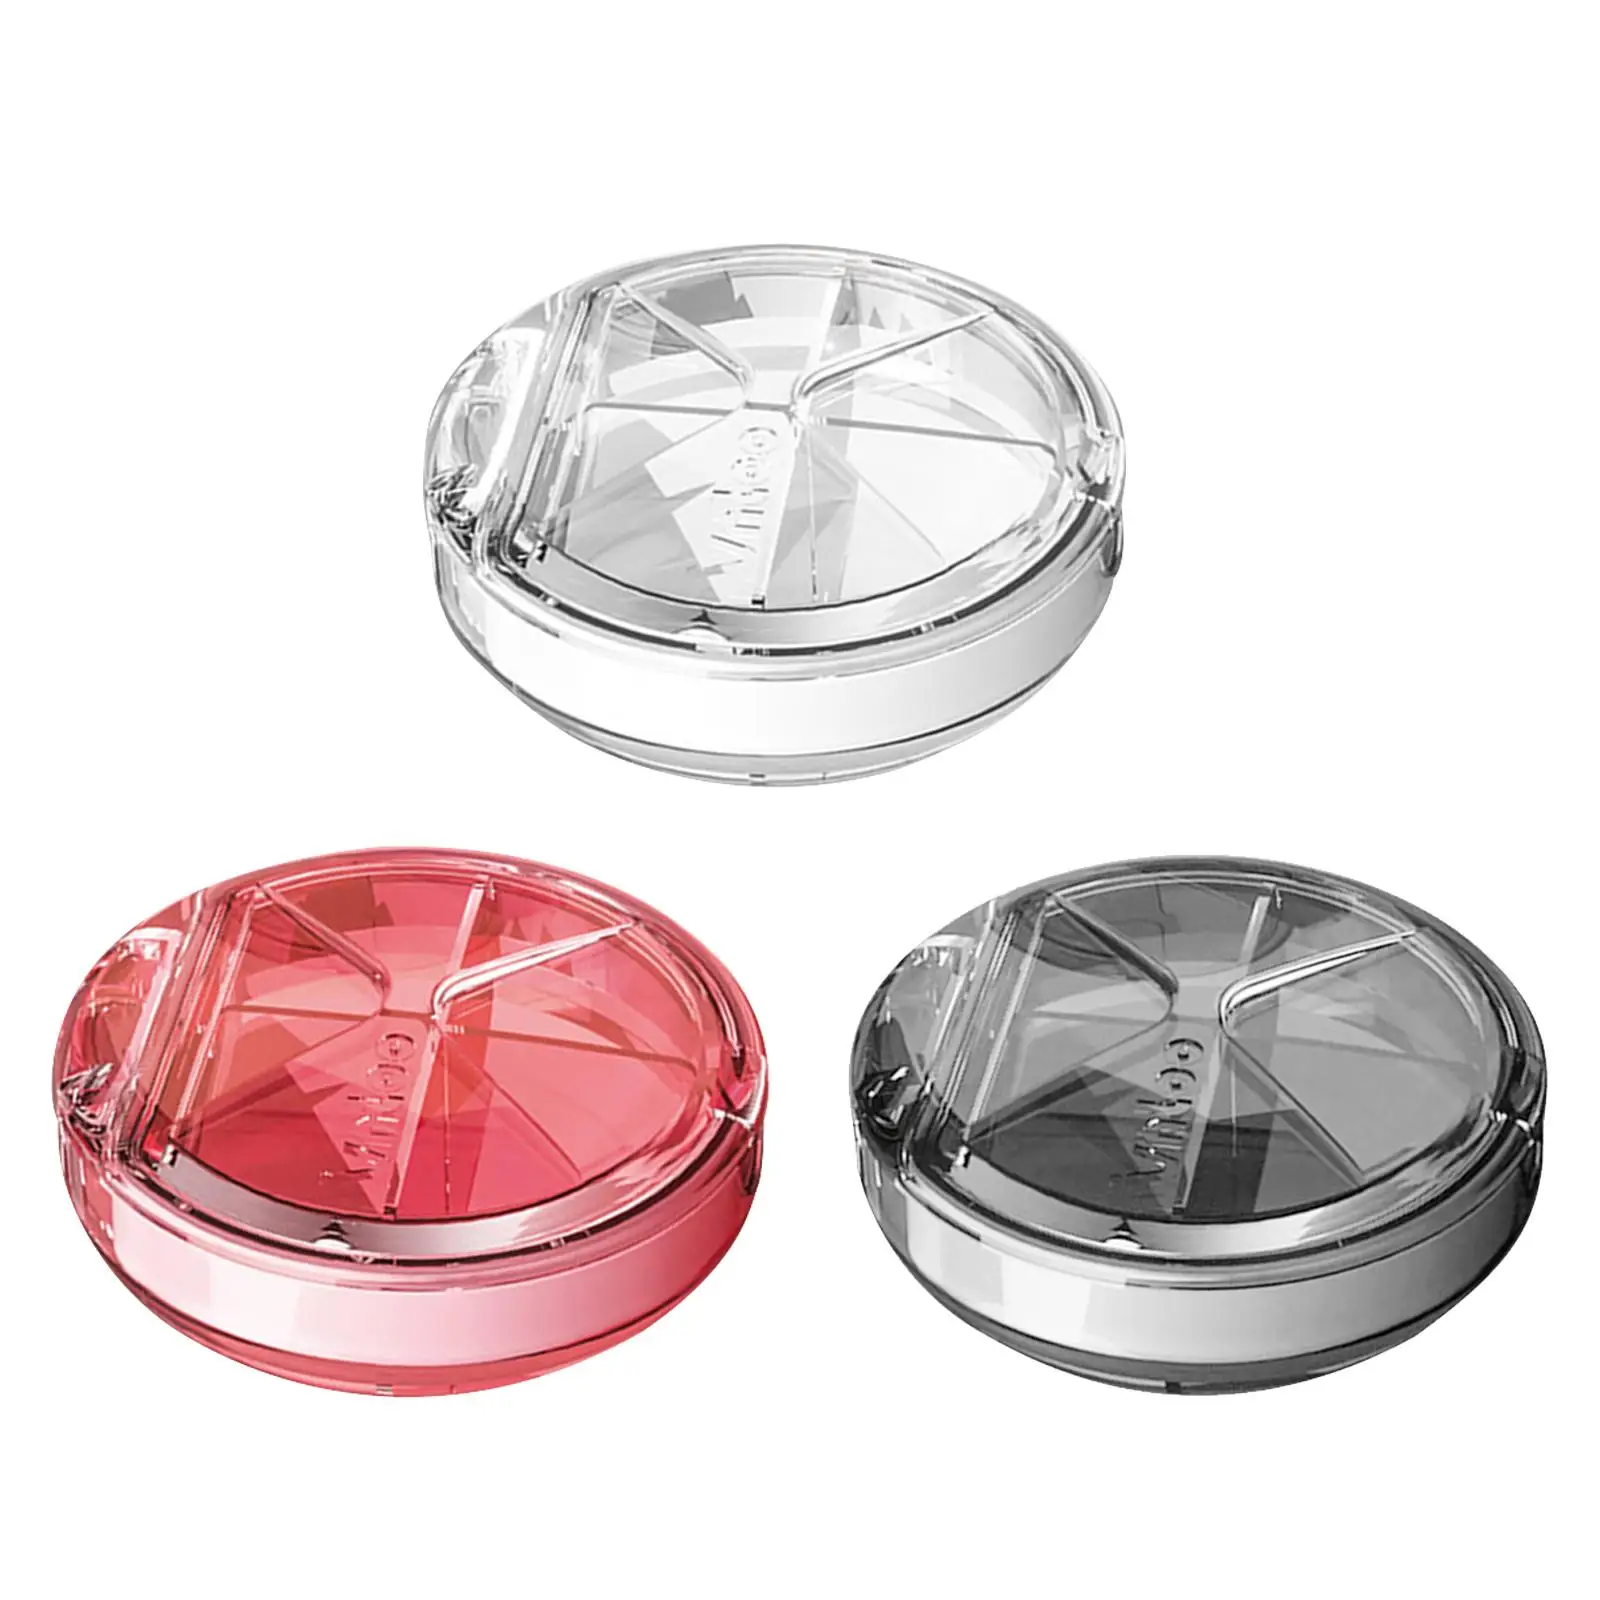 Portable Pill Box Organizer Compact Dustproof 4 Grids Pocket Storage Case Dispenser Container for Traveling Hiking